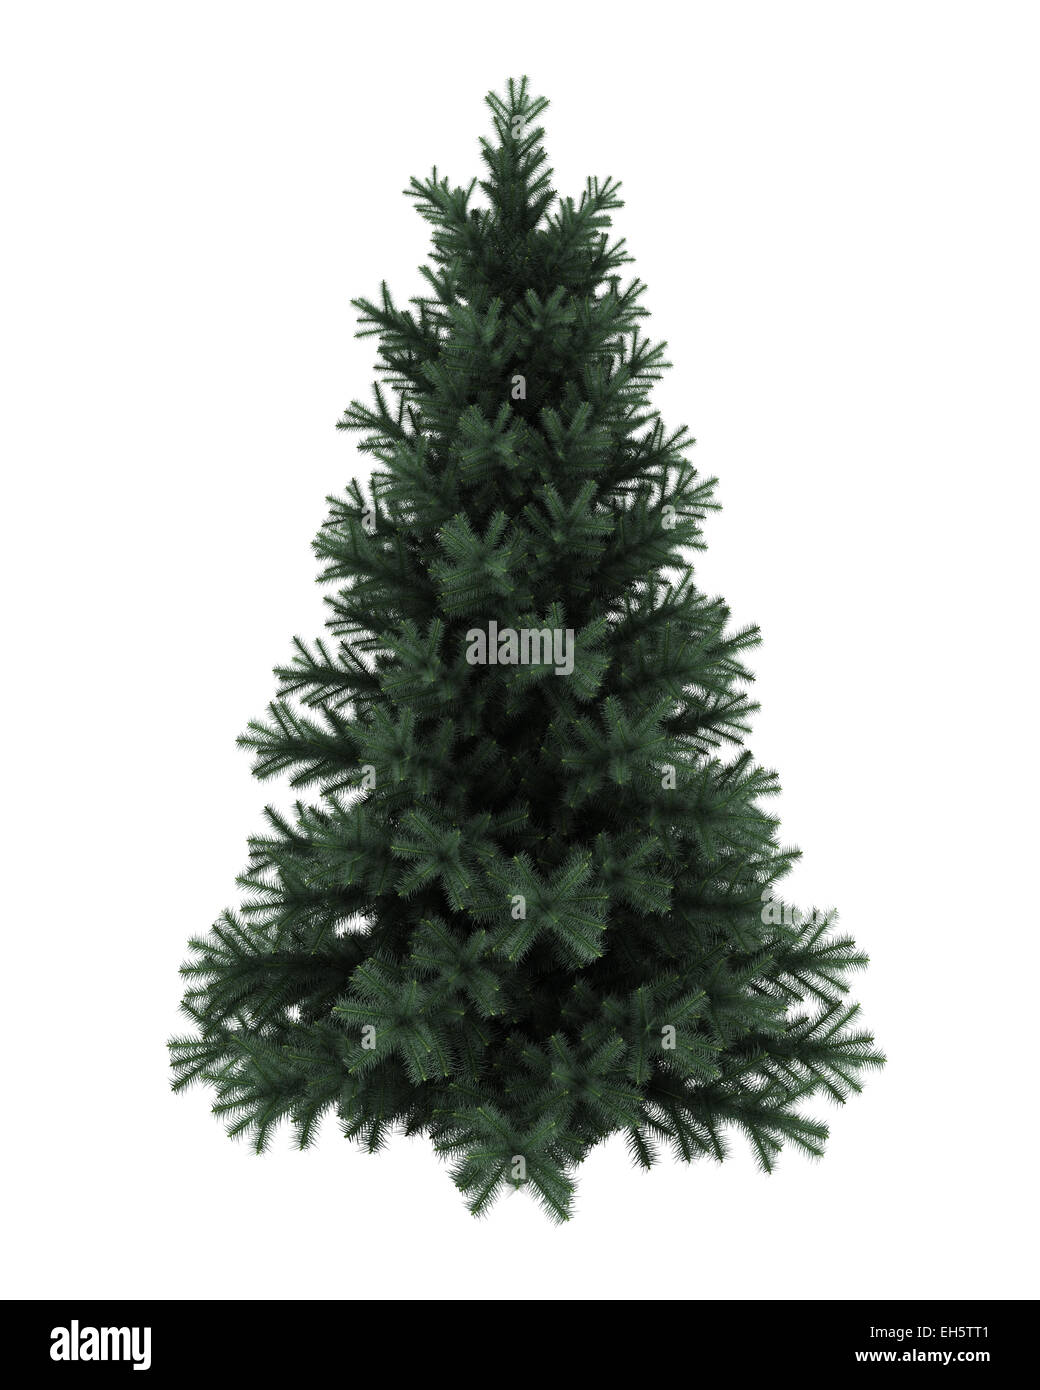 Alpine fir tree isolated on white background Stock Photo